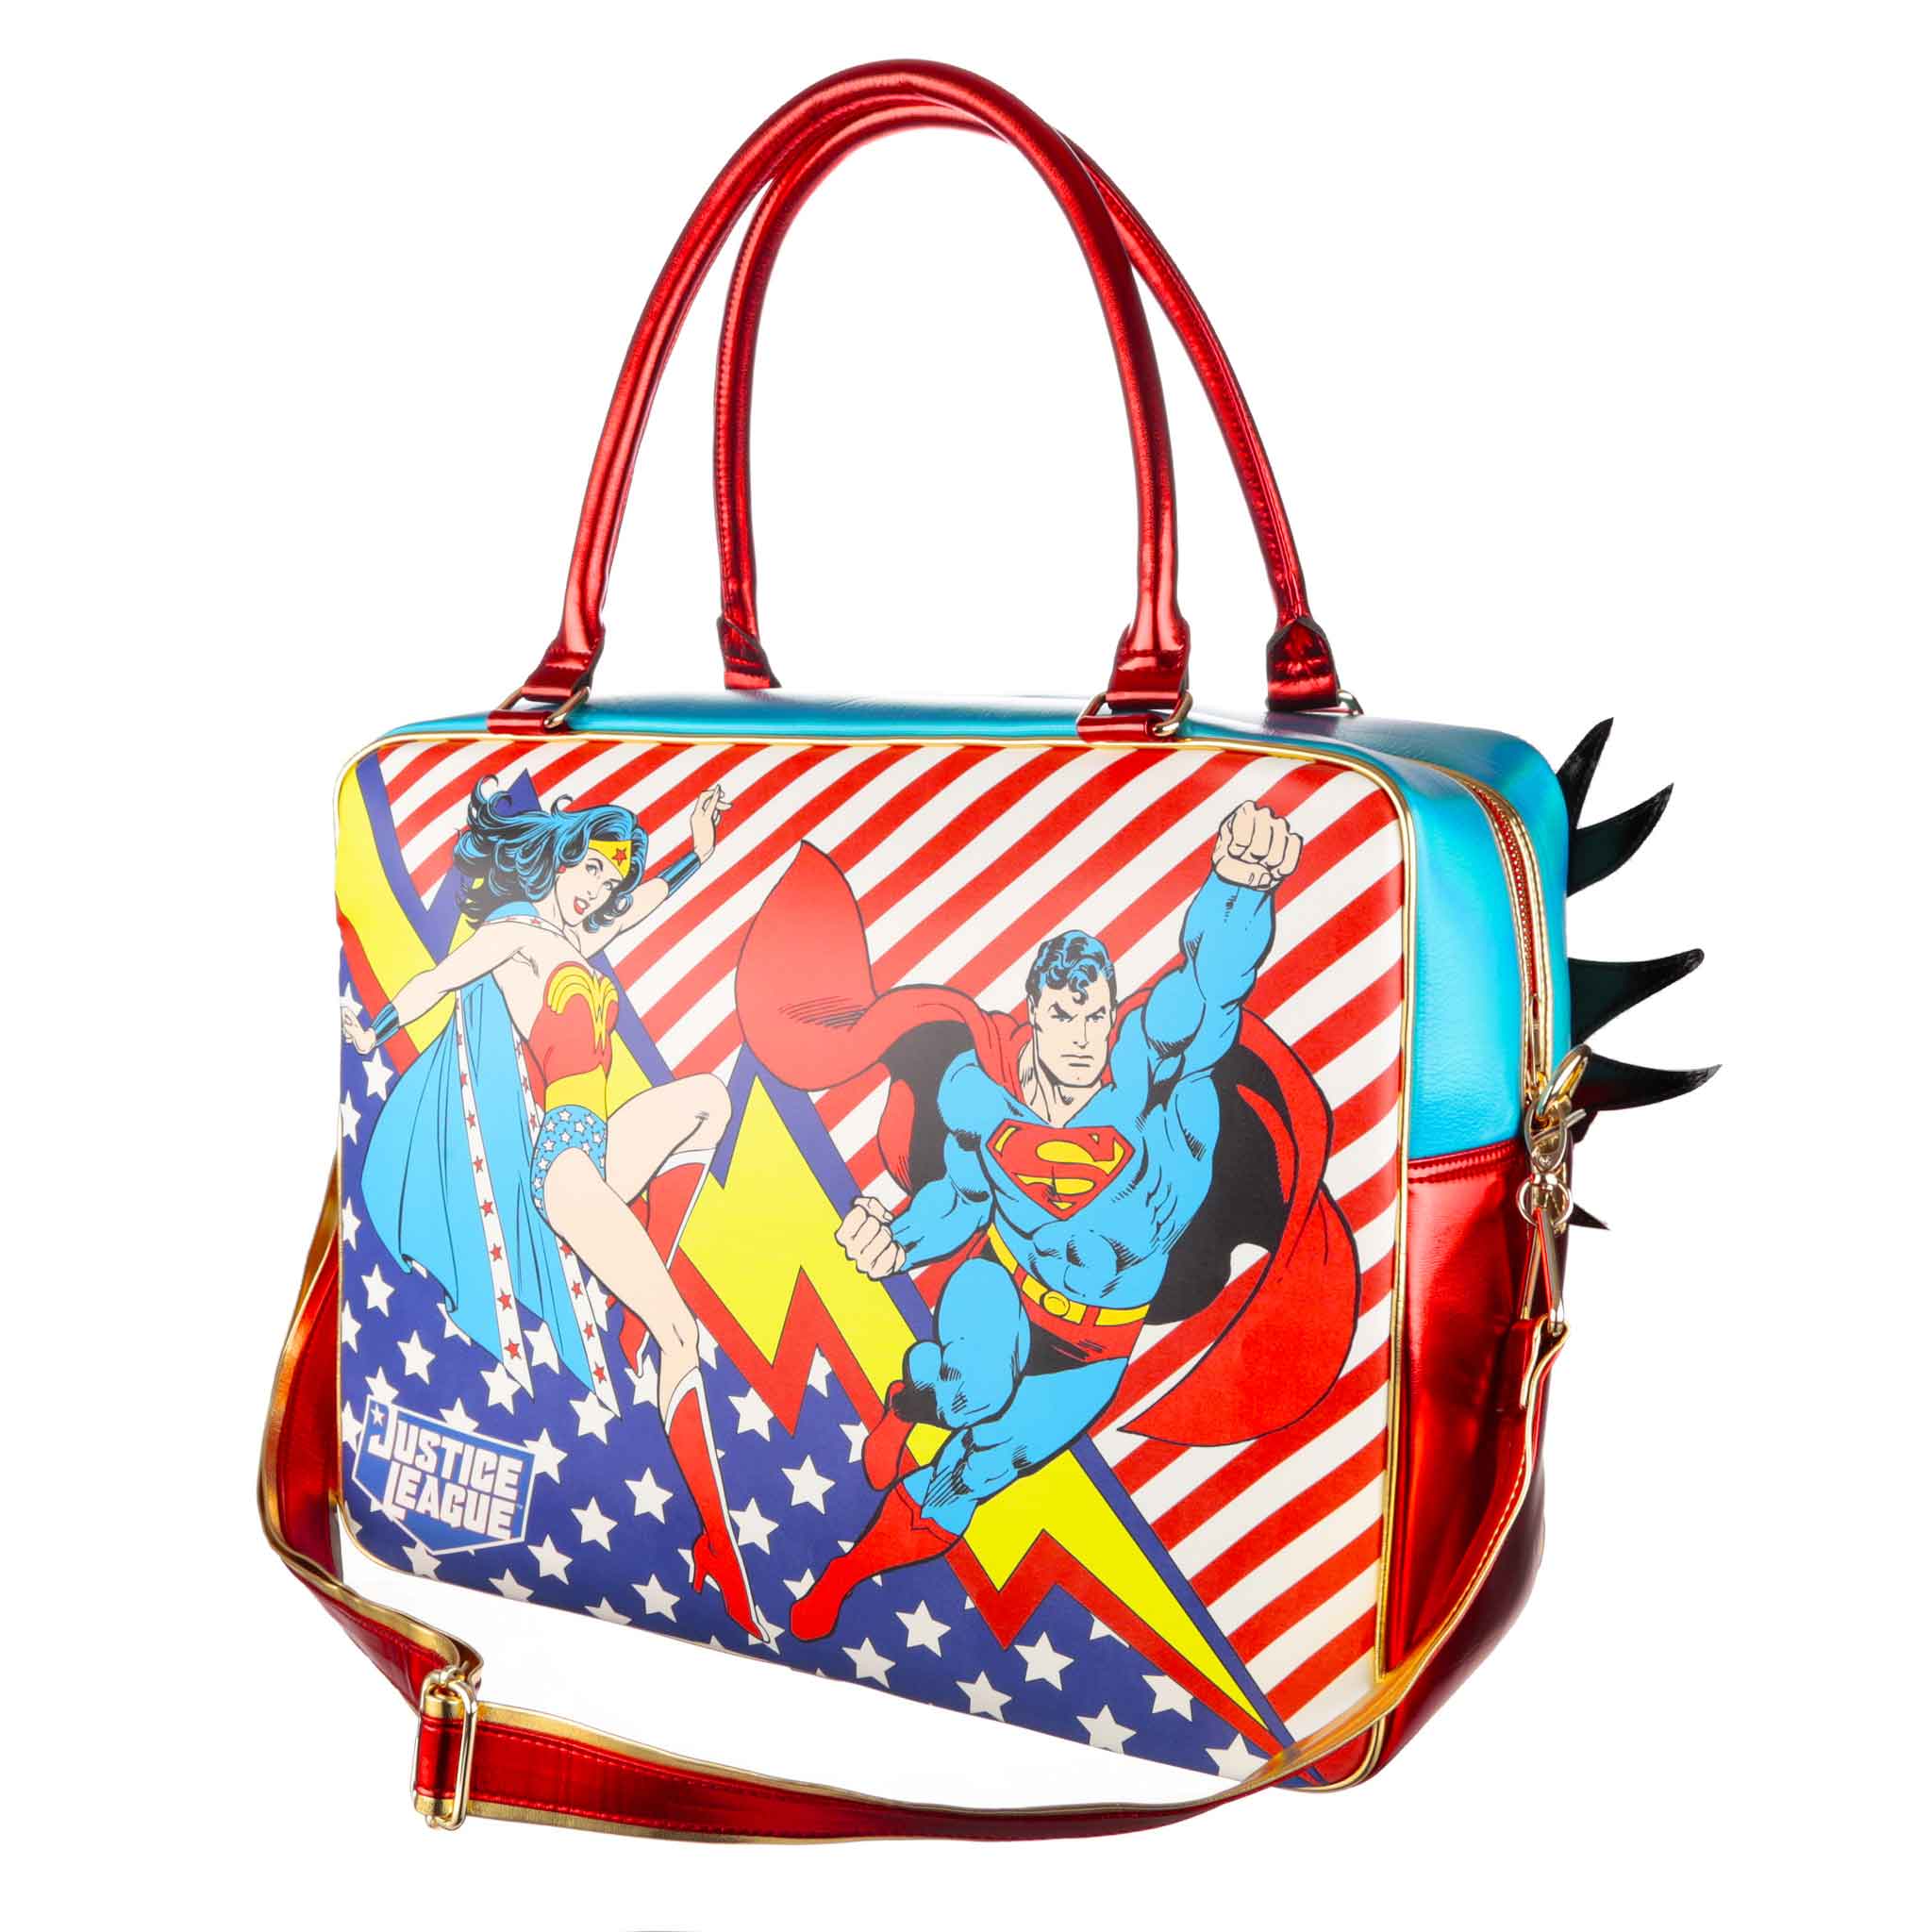 Irregular Choice Womens Justice League Defenders of Justice Bag